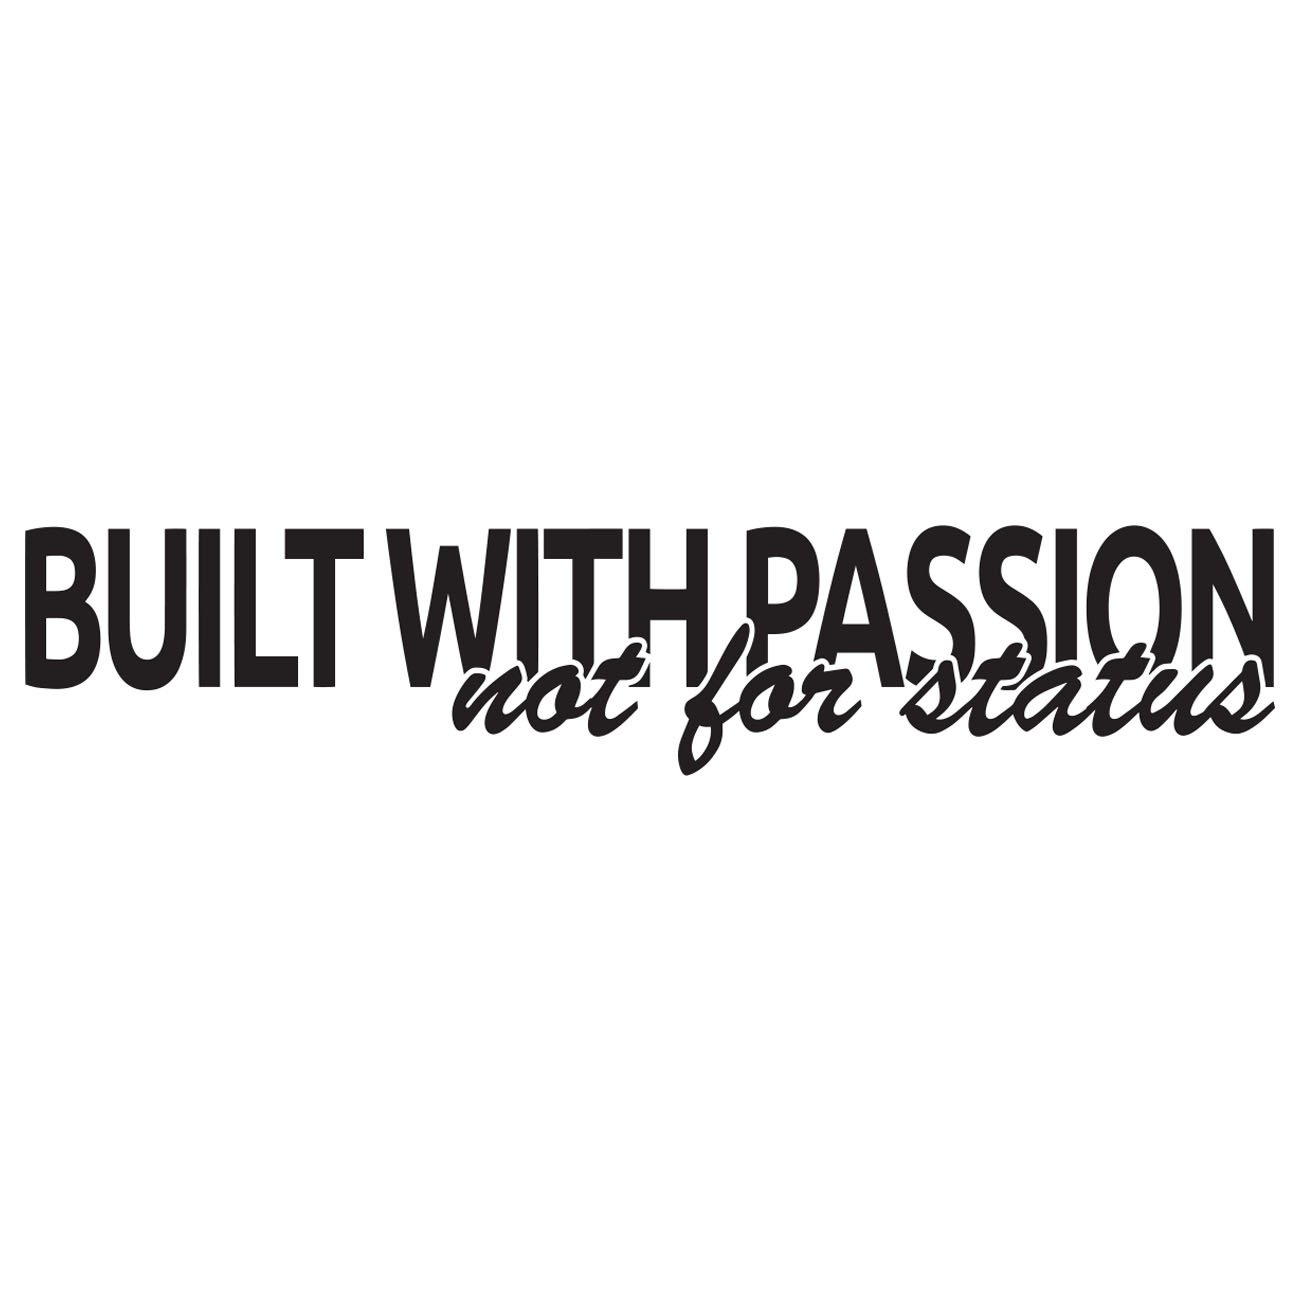 Built with passion - Not for status